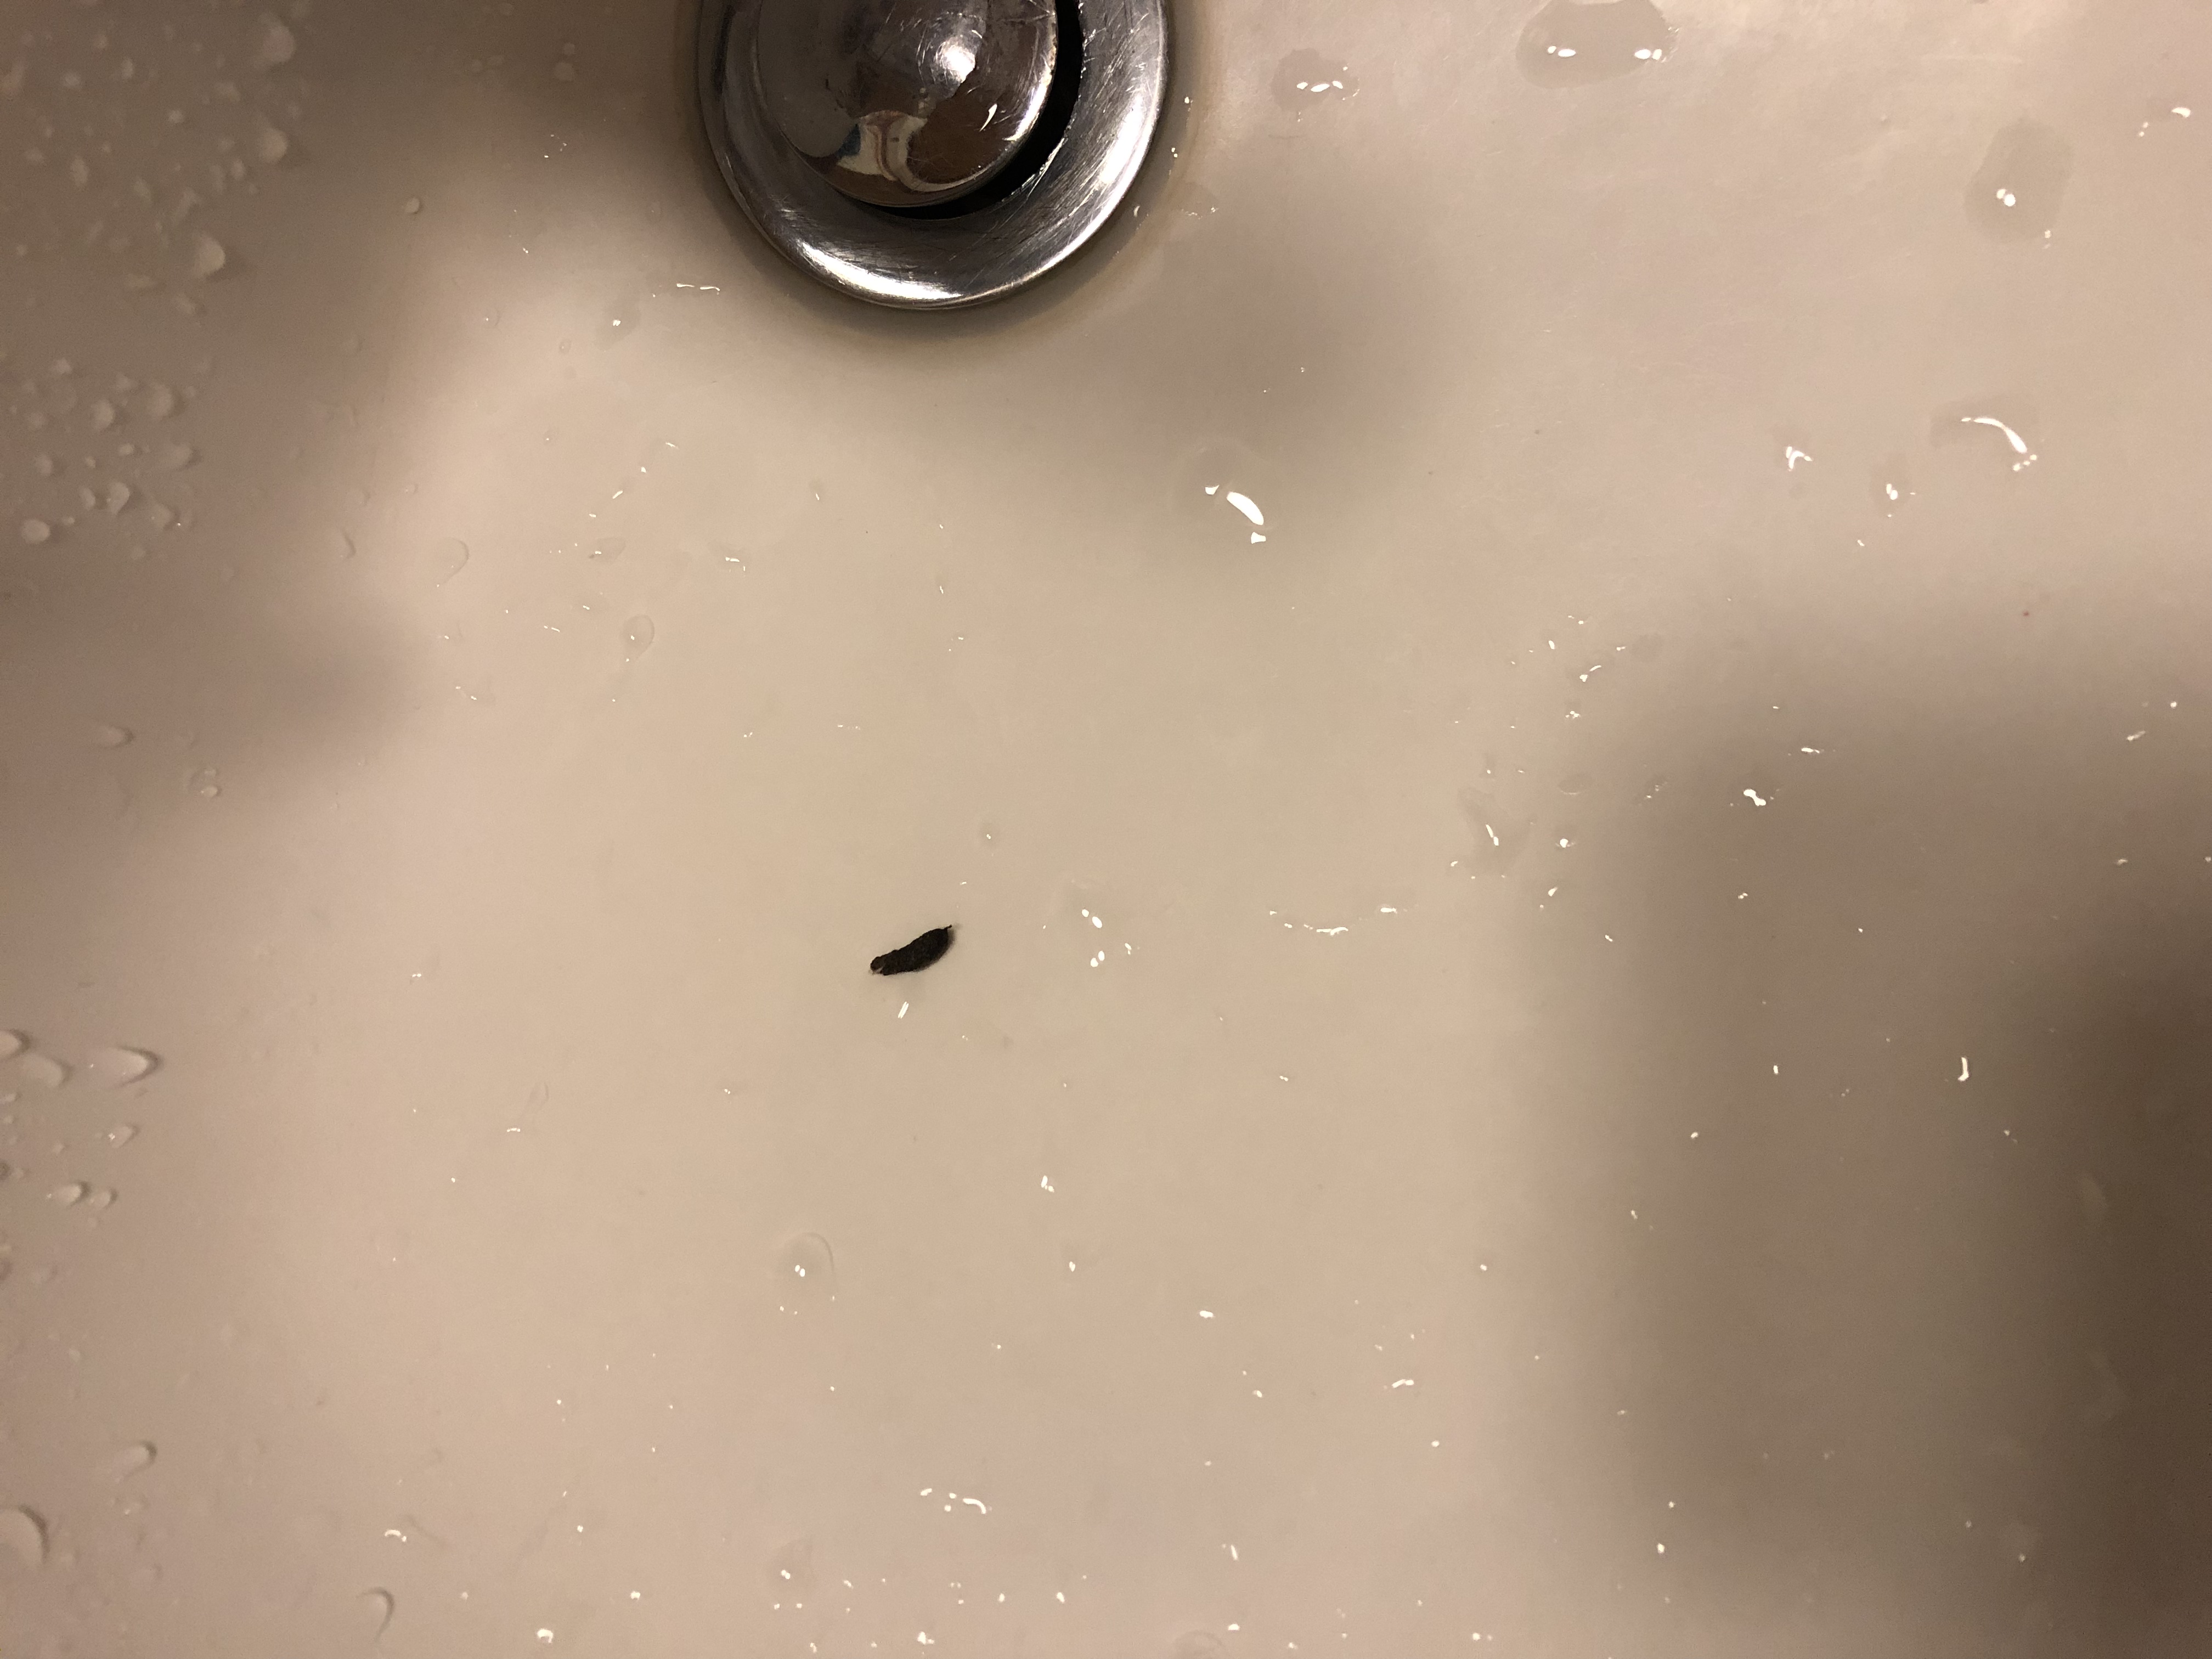 Mice dropping in sink 